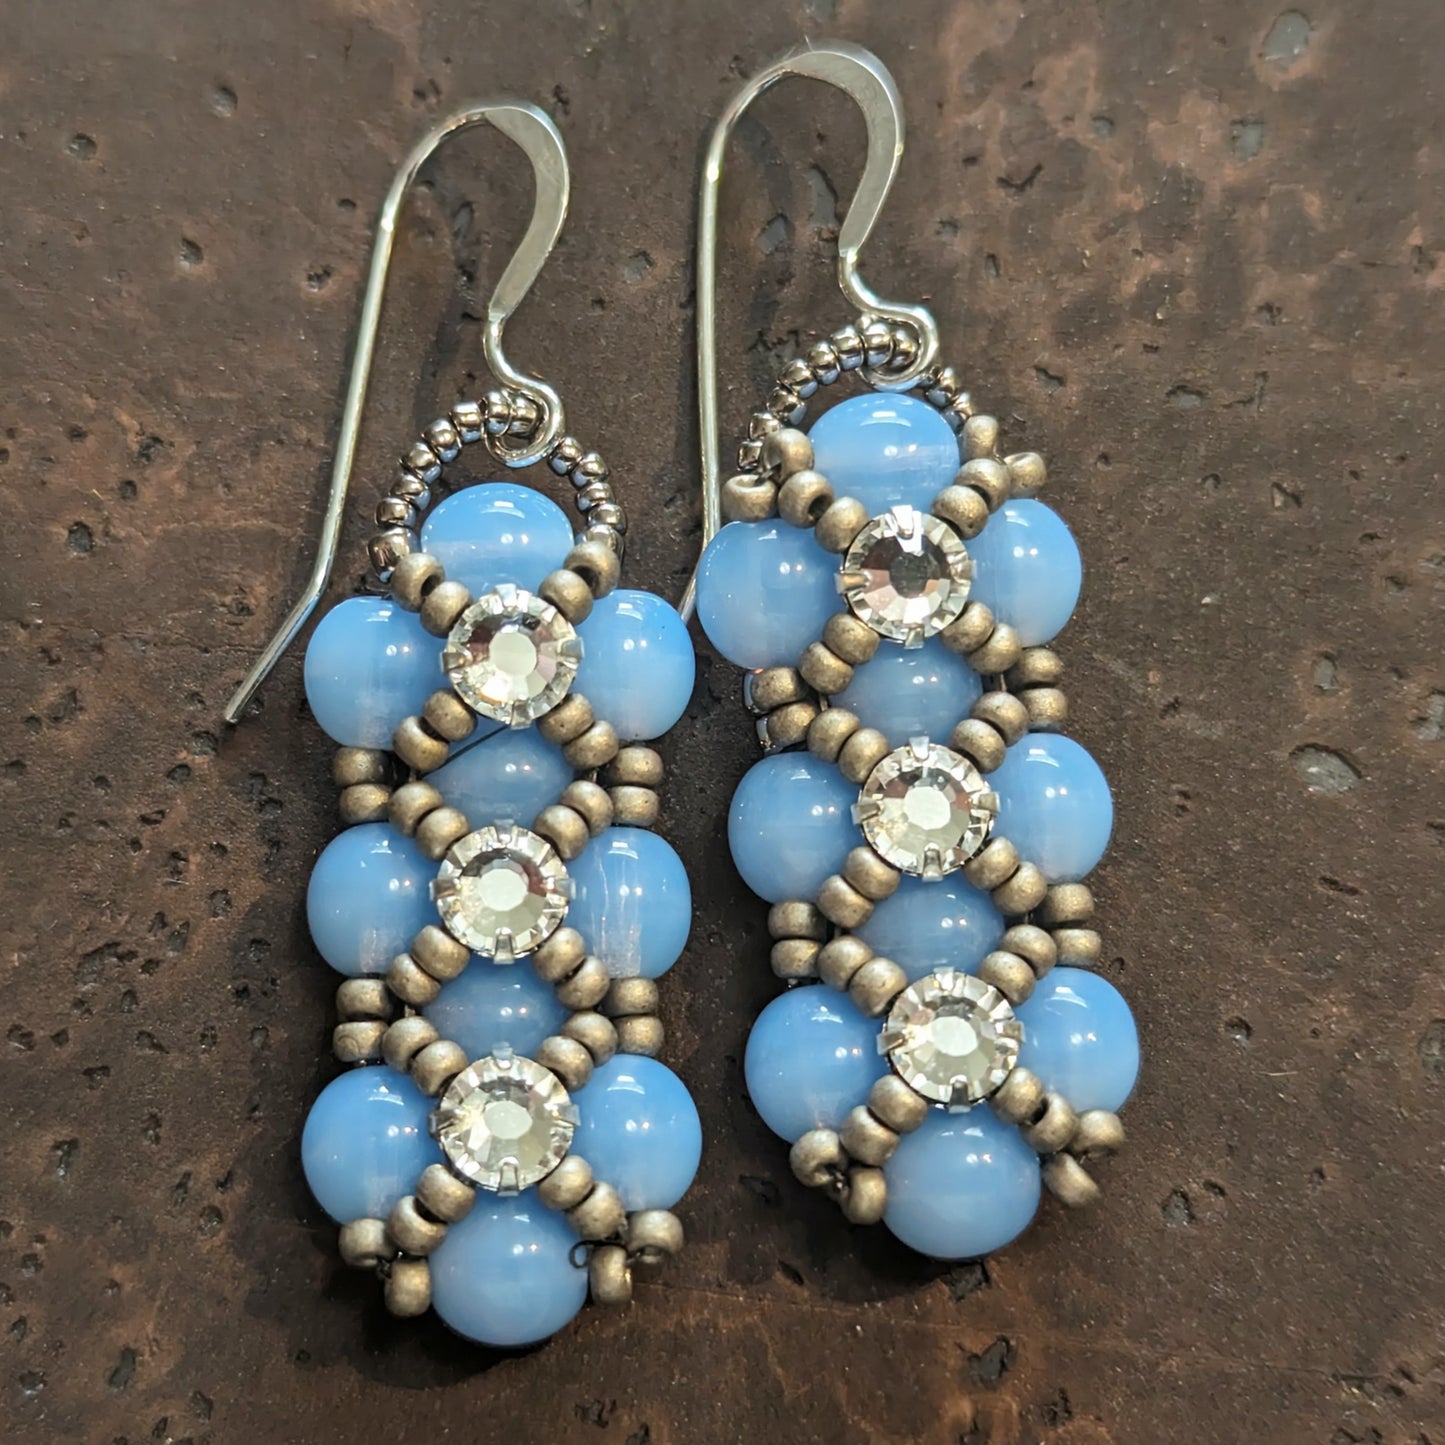 Silver and pale opal blue earrings on a cork-like dark brown background. The earrings have a background of light cloudy blue and there are matte silver seed beads in x-shape securing three clear rhinestones in a vertical row. The earrings have silver ear wires.